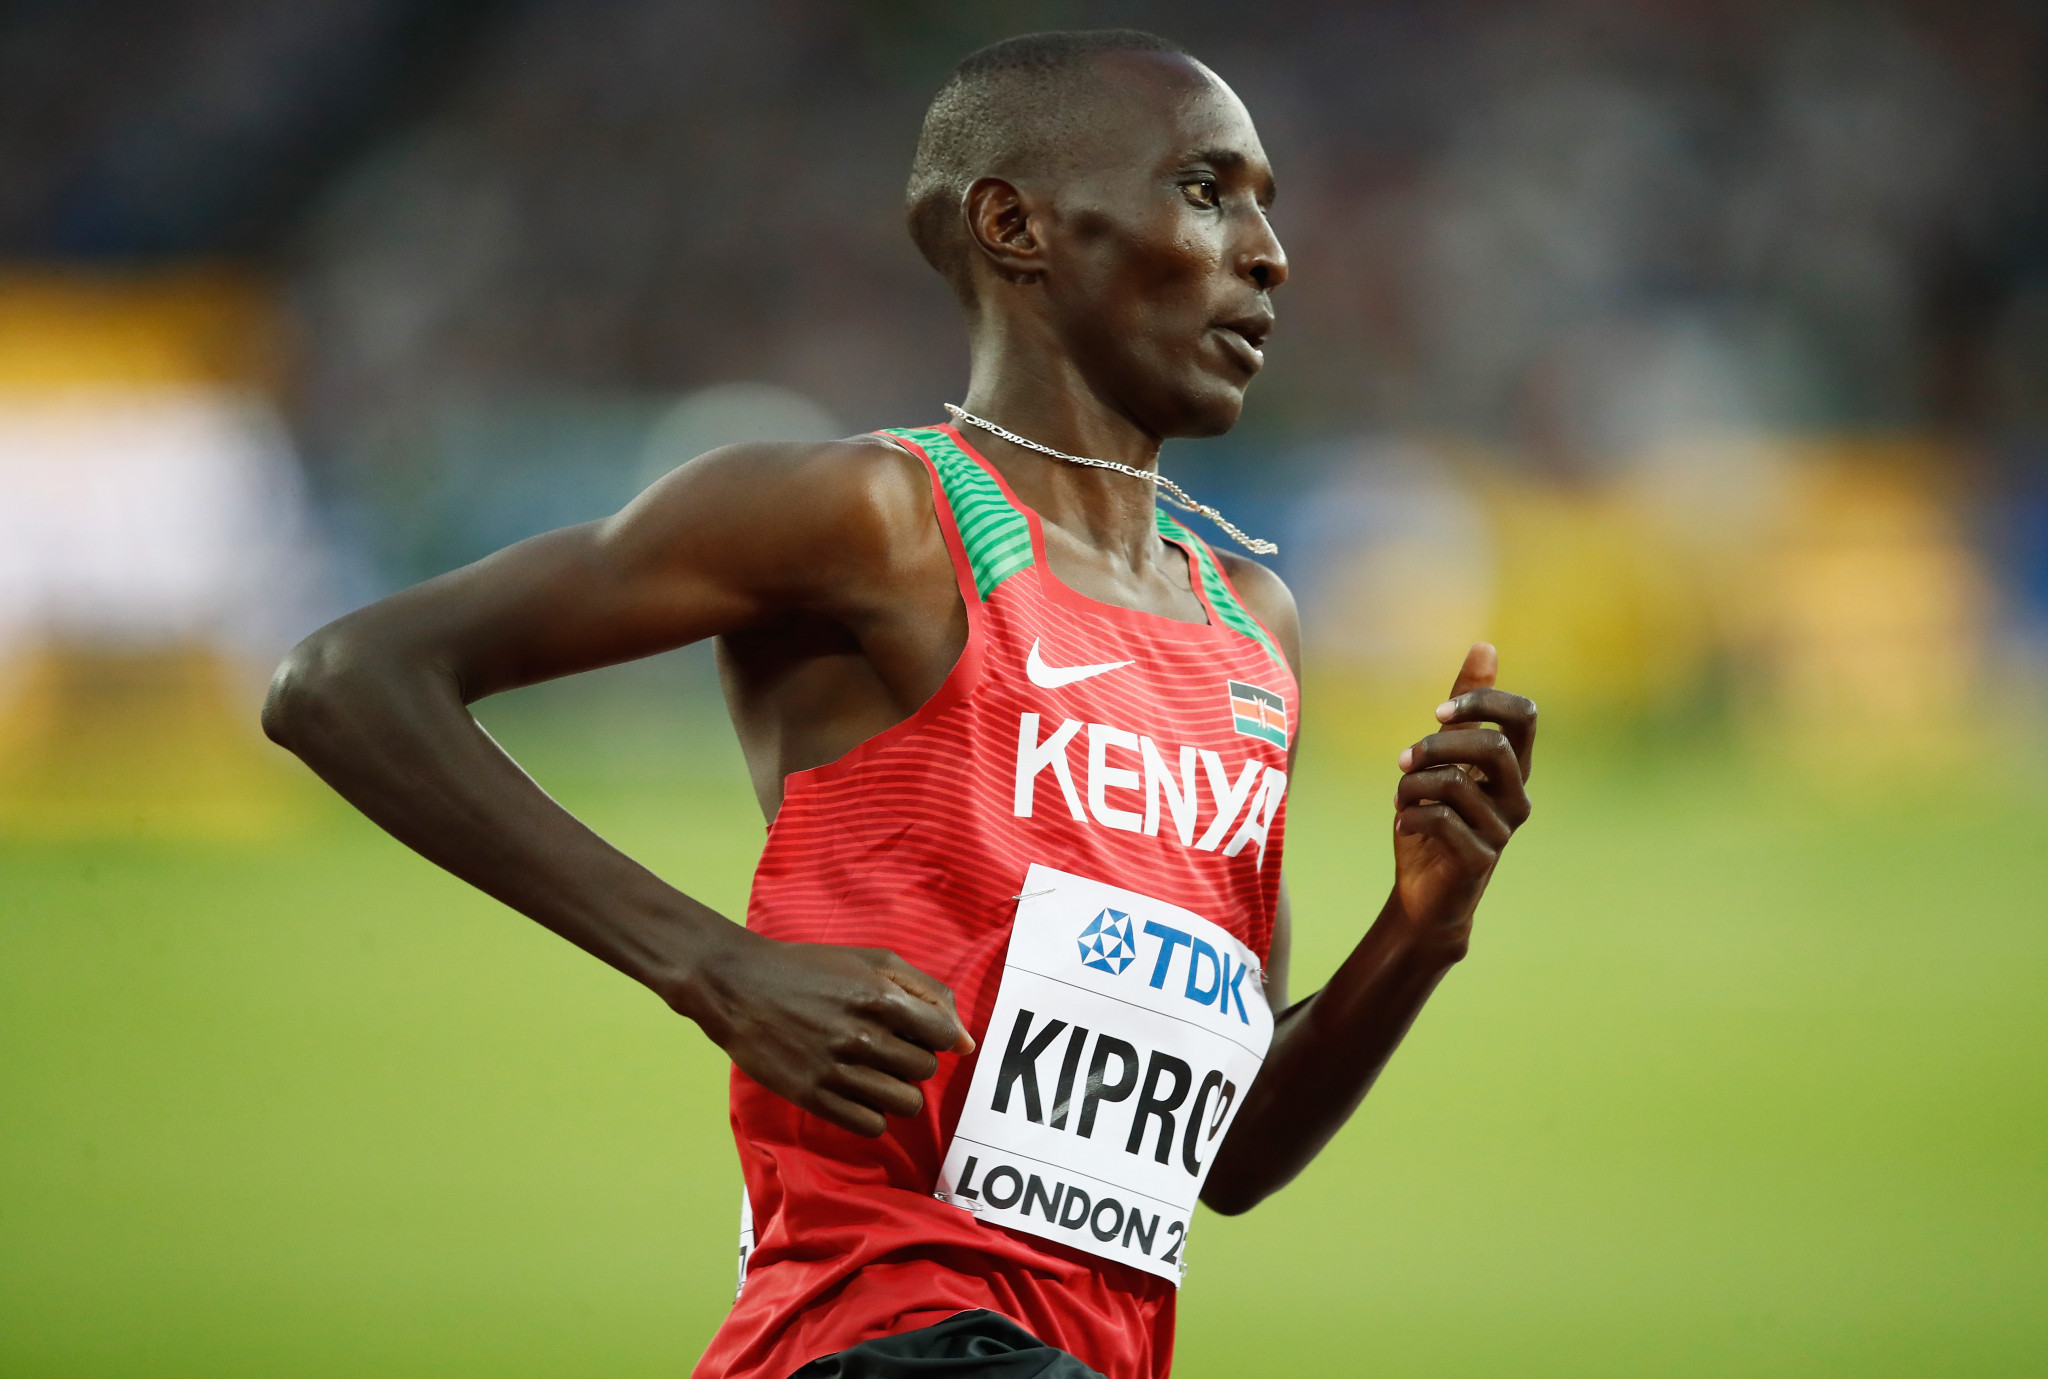 Kiprop hit with four-year ban after positive test for EPO